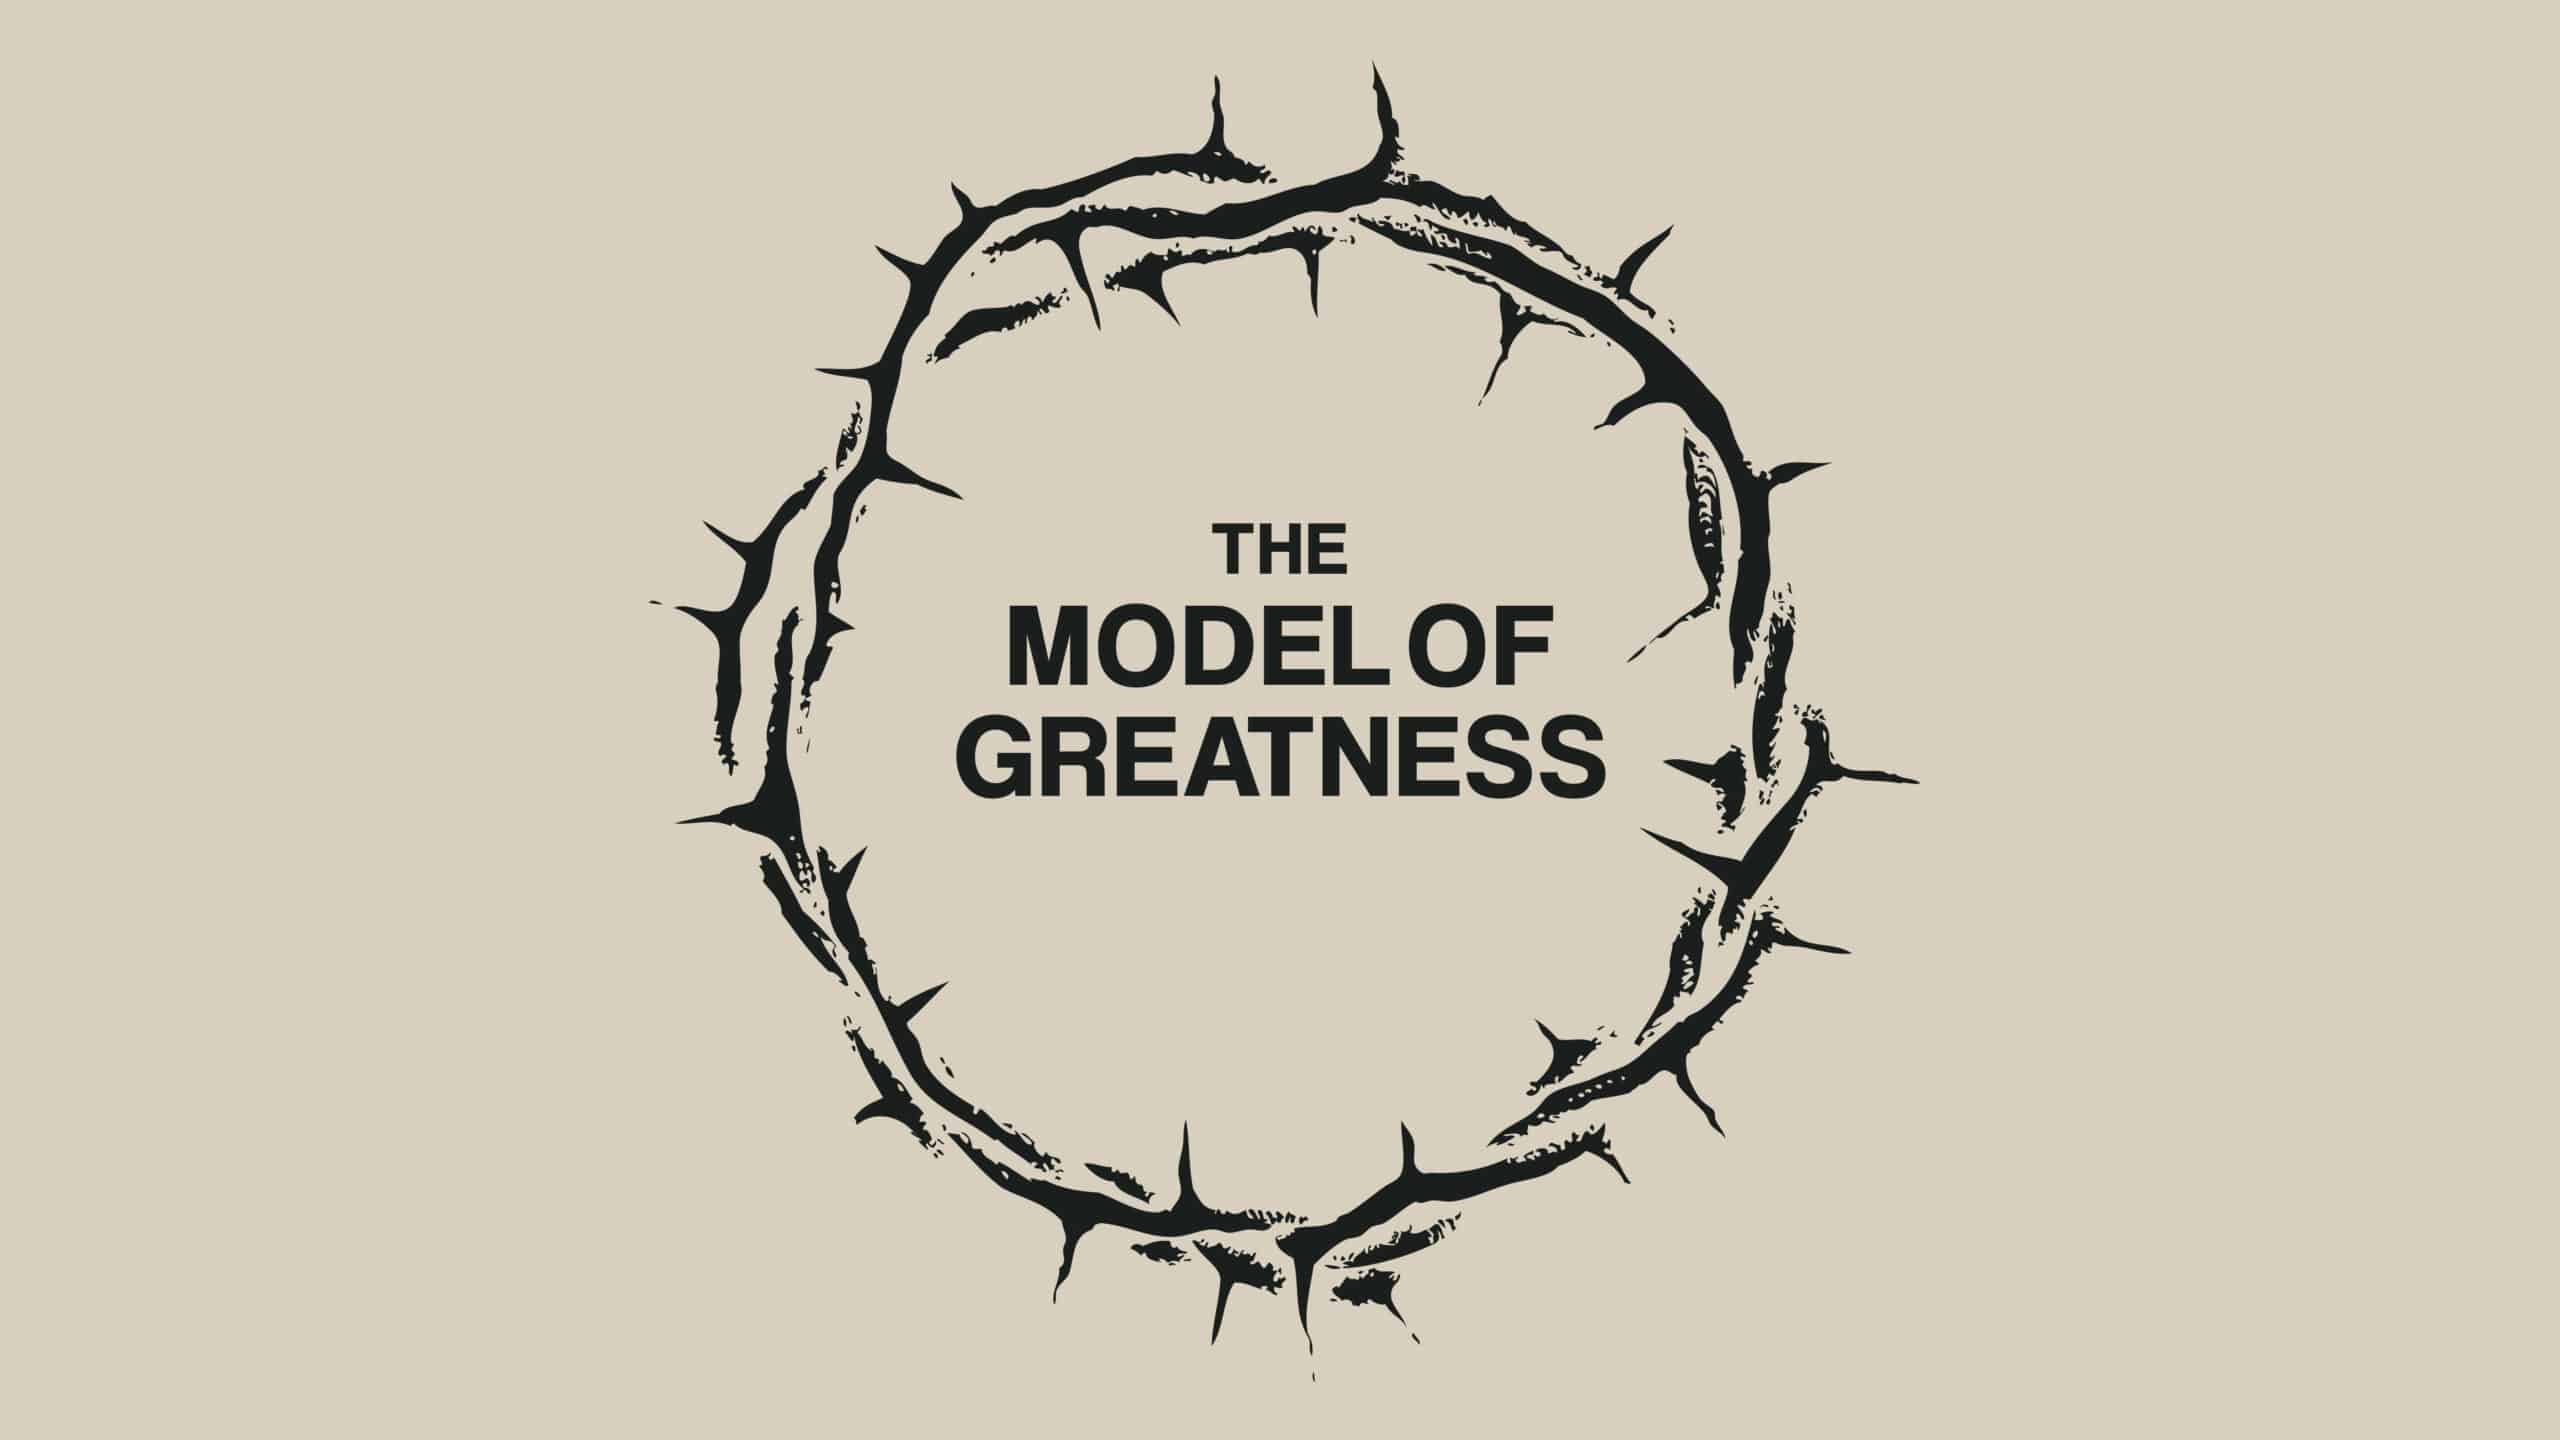 The Model of Greatness